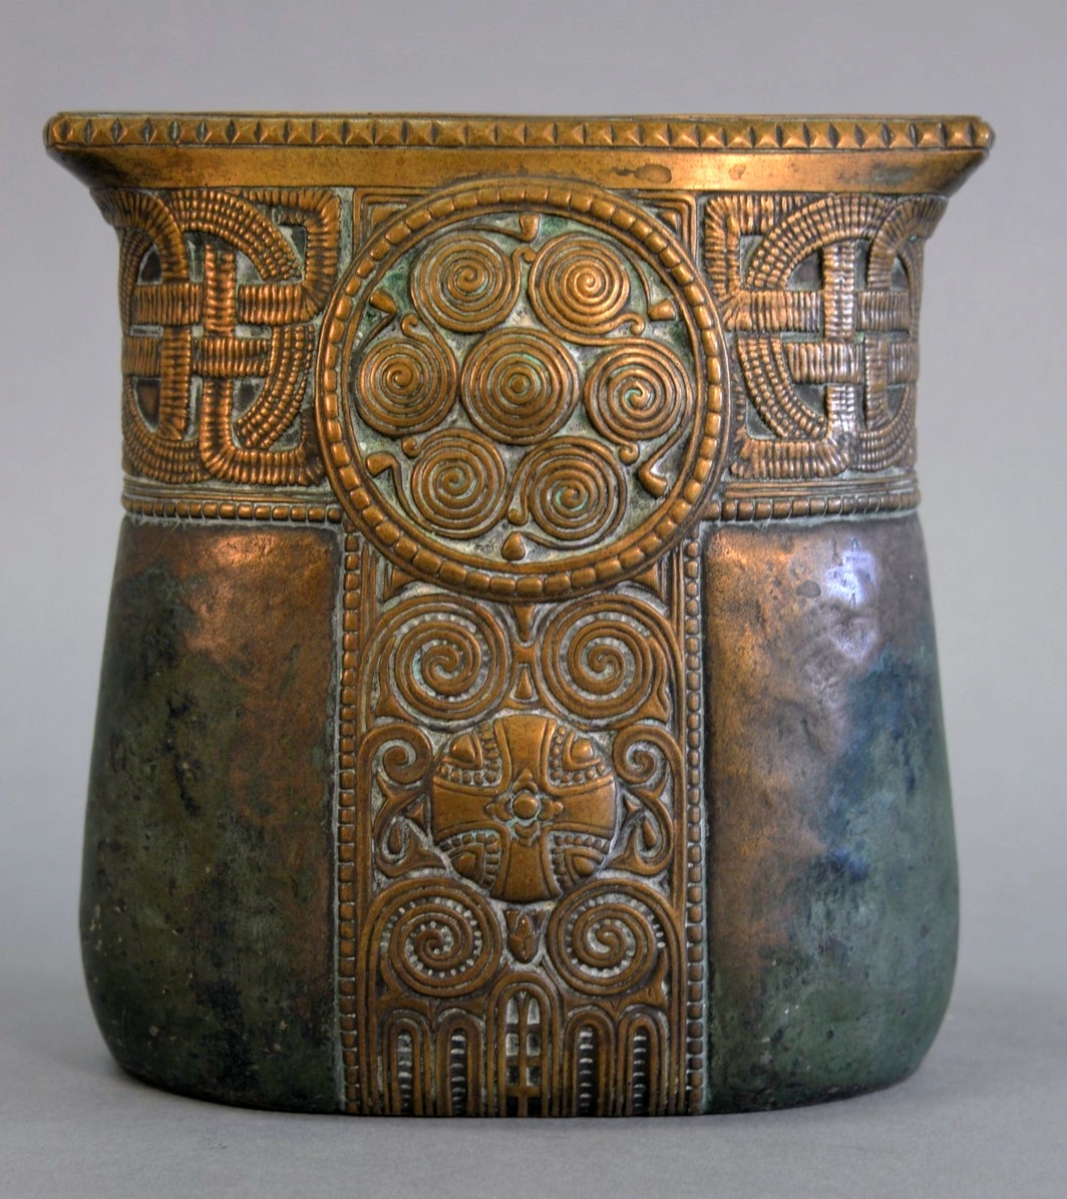 Gustav Gurschner Art Deco bronze vase, stamped “Made in Austria” was the top lot and sold for $6,350.